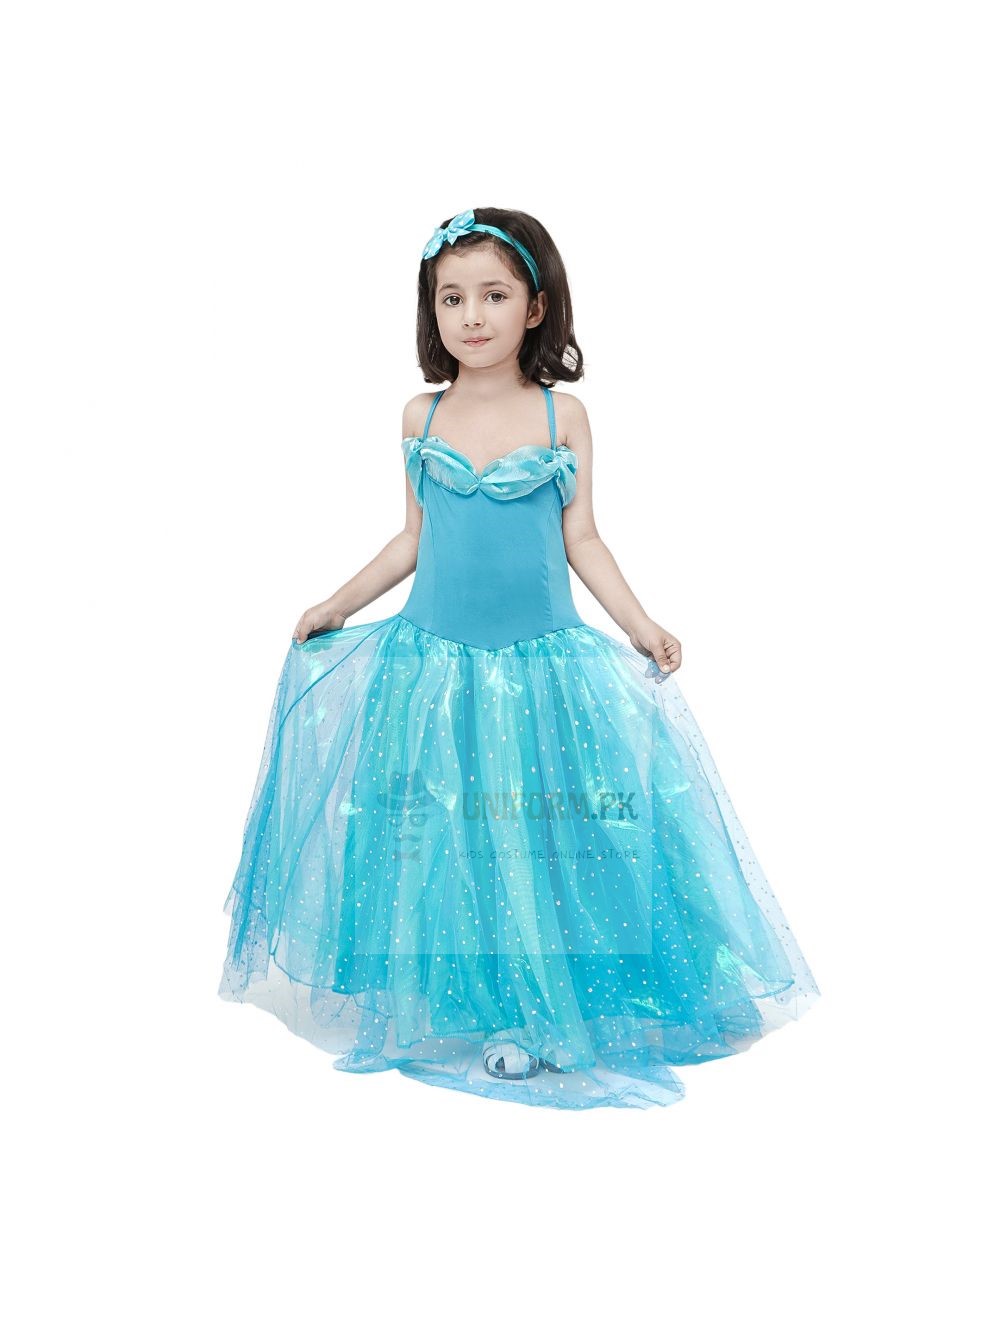 ONCEMORE Sleeveless ONeck Lace Flower Girl Tutu Dresses with Big Bow Blue  and Sapphire 100 Online Shopping in Pakistan